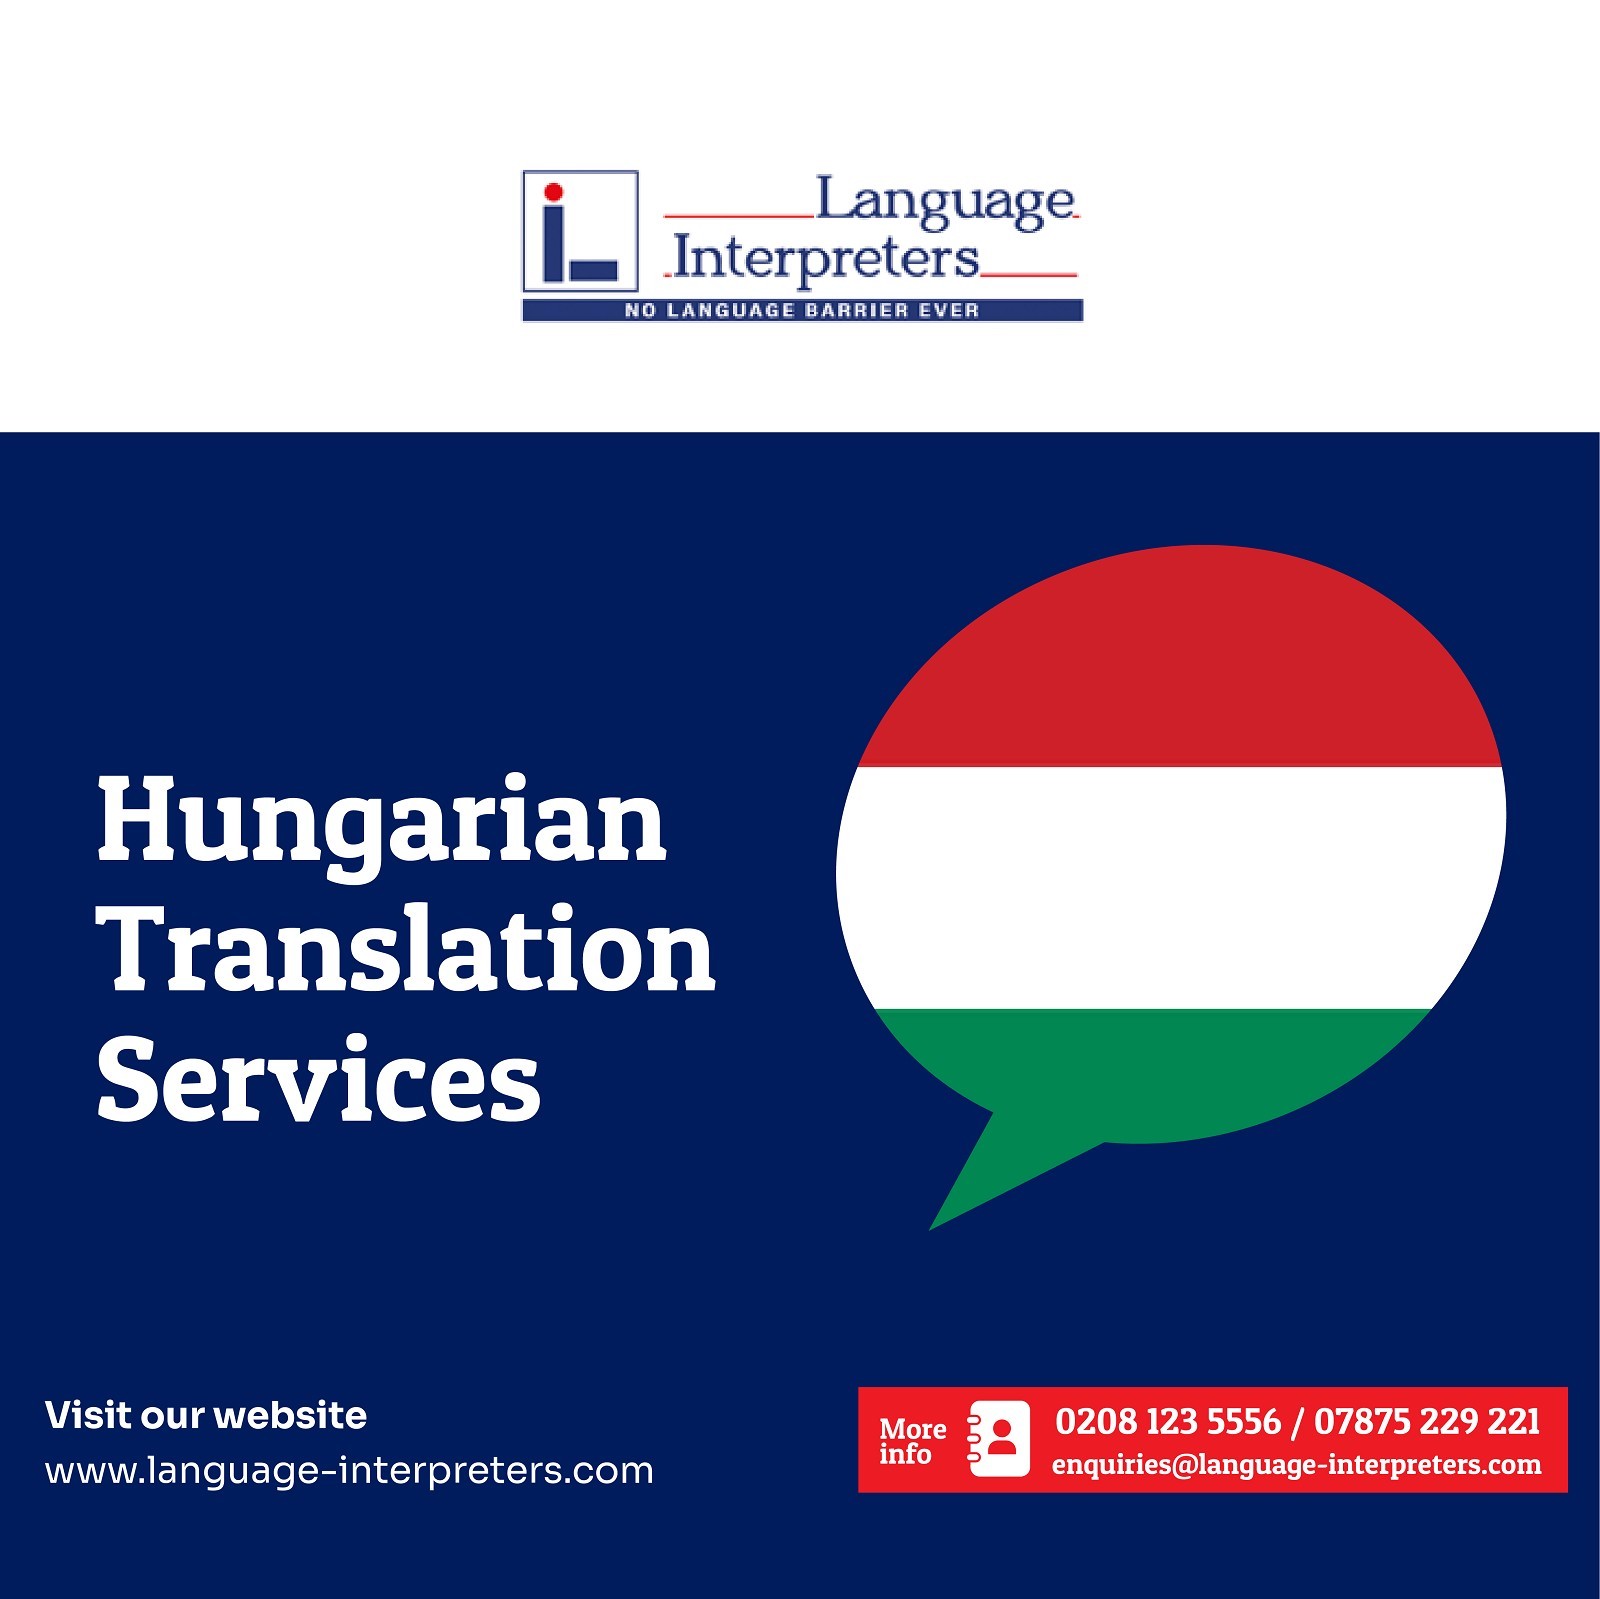 Hungarian translation services